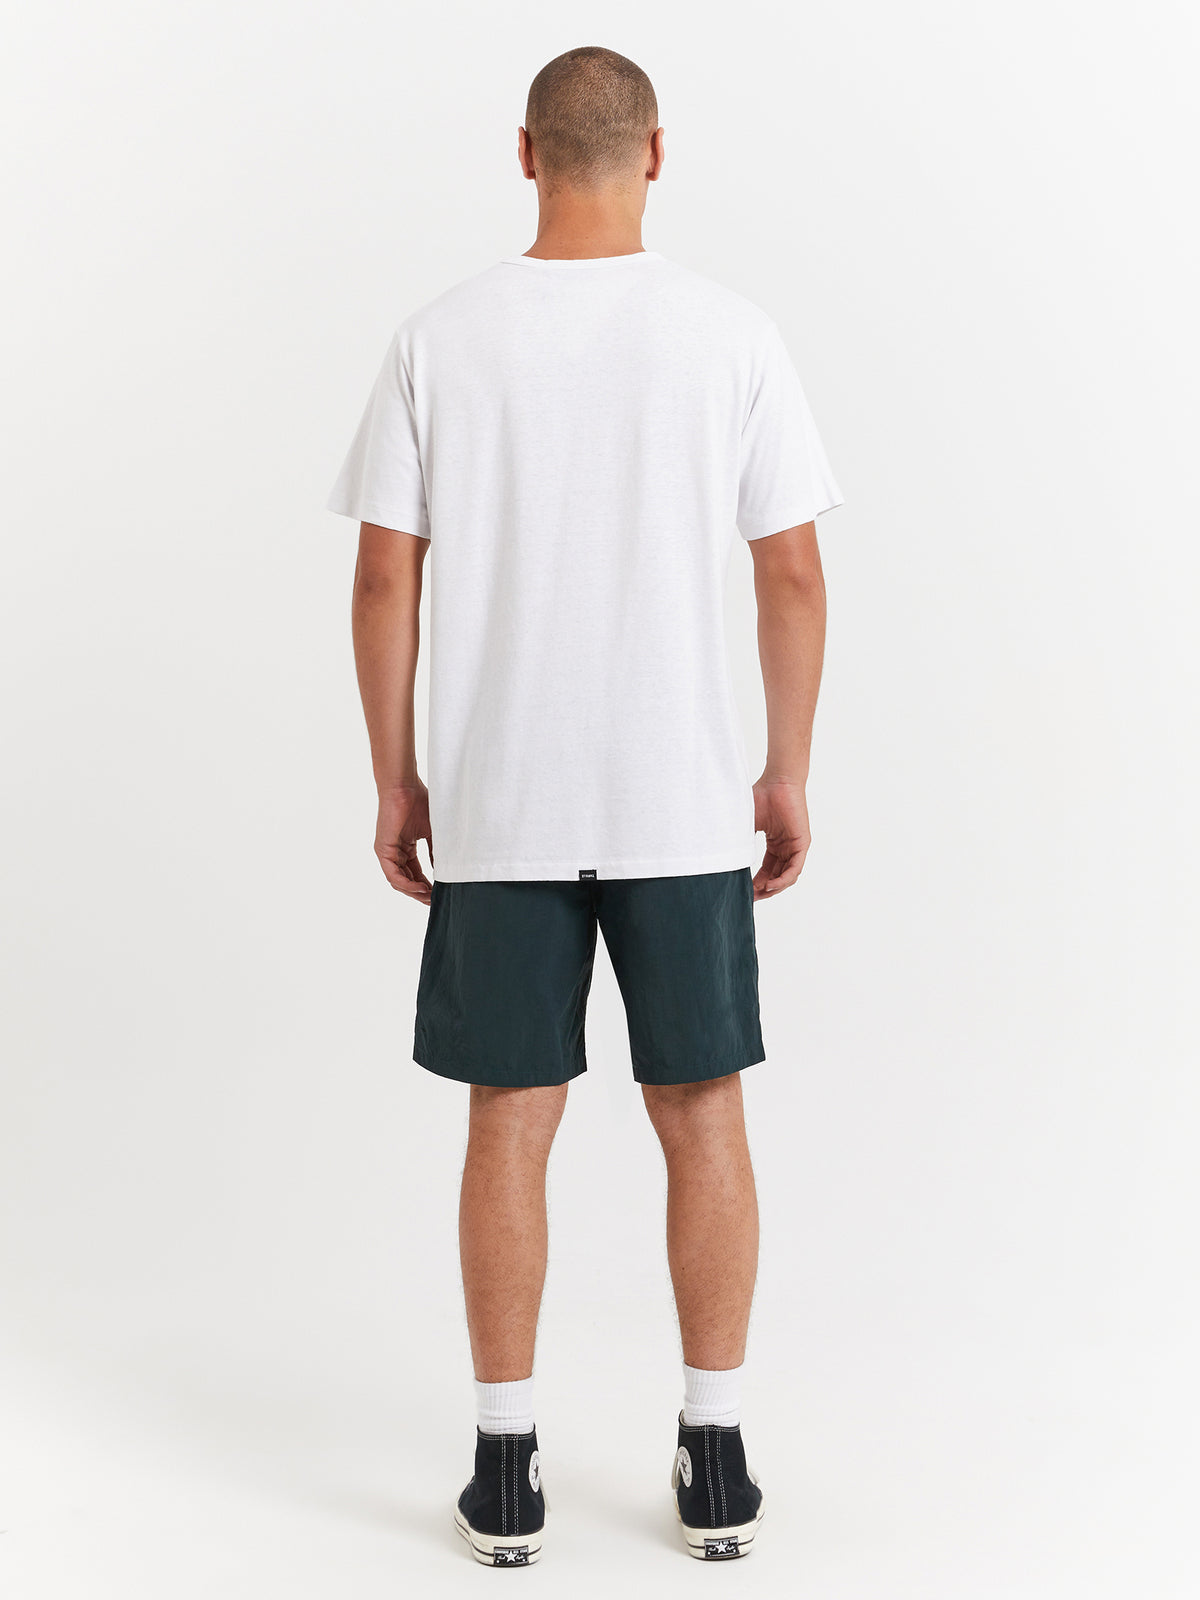 Hemp Existencial Merch Fit T-Shirt in Lucent White